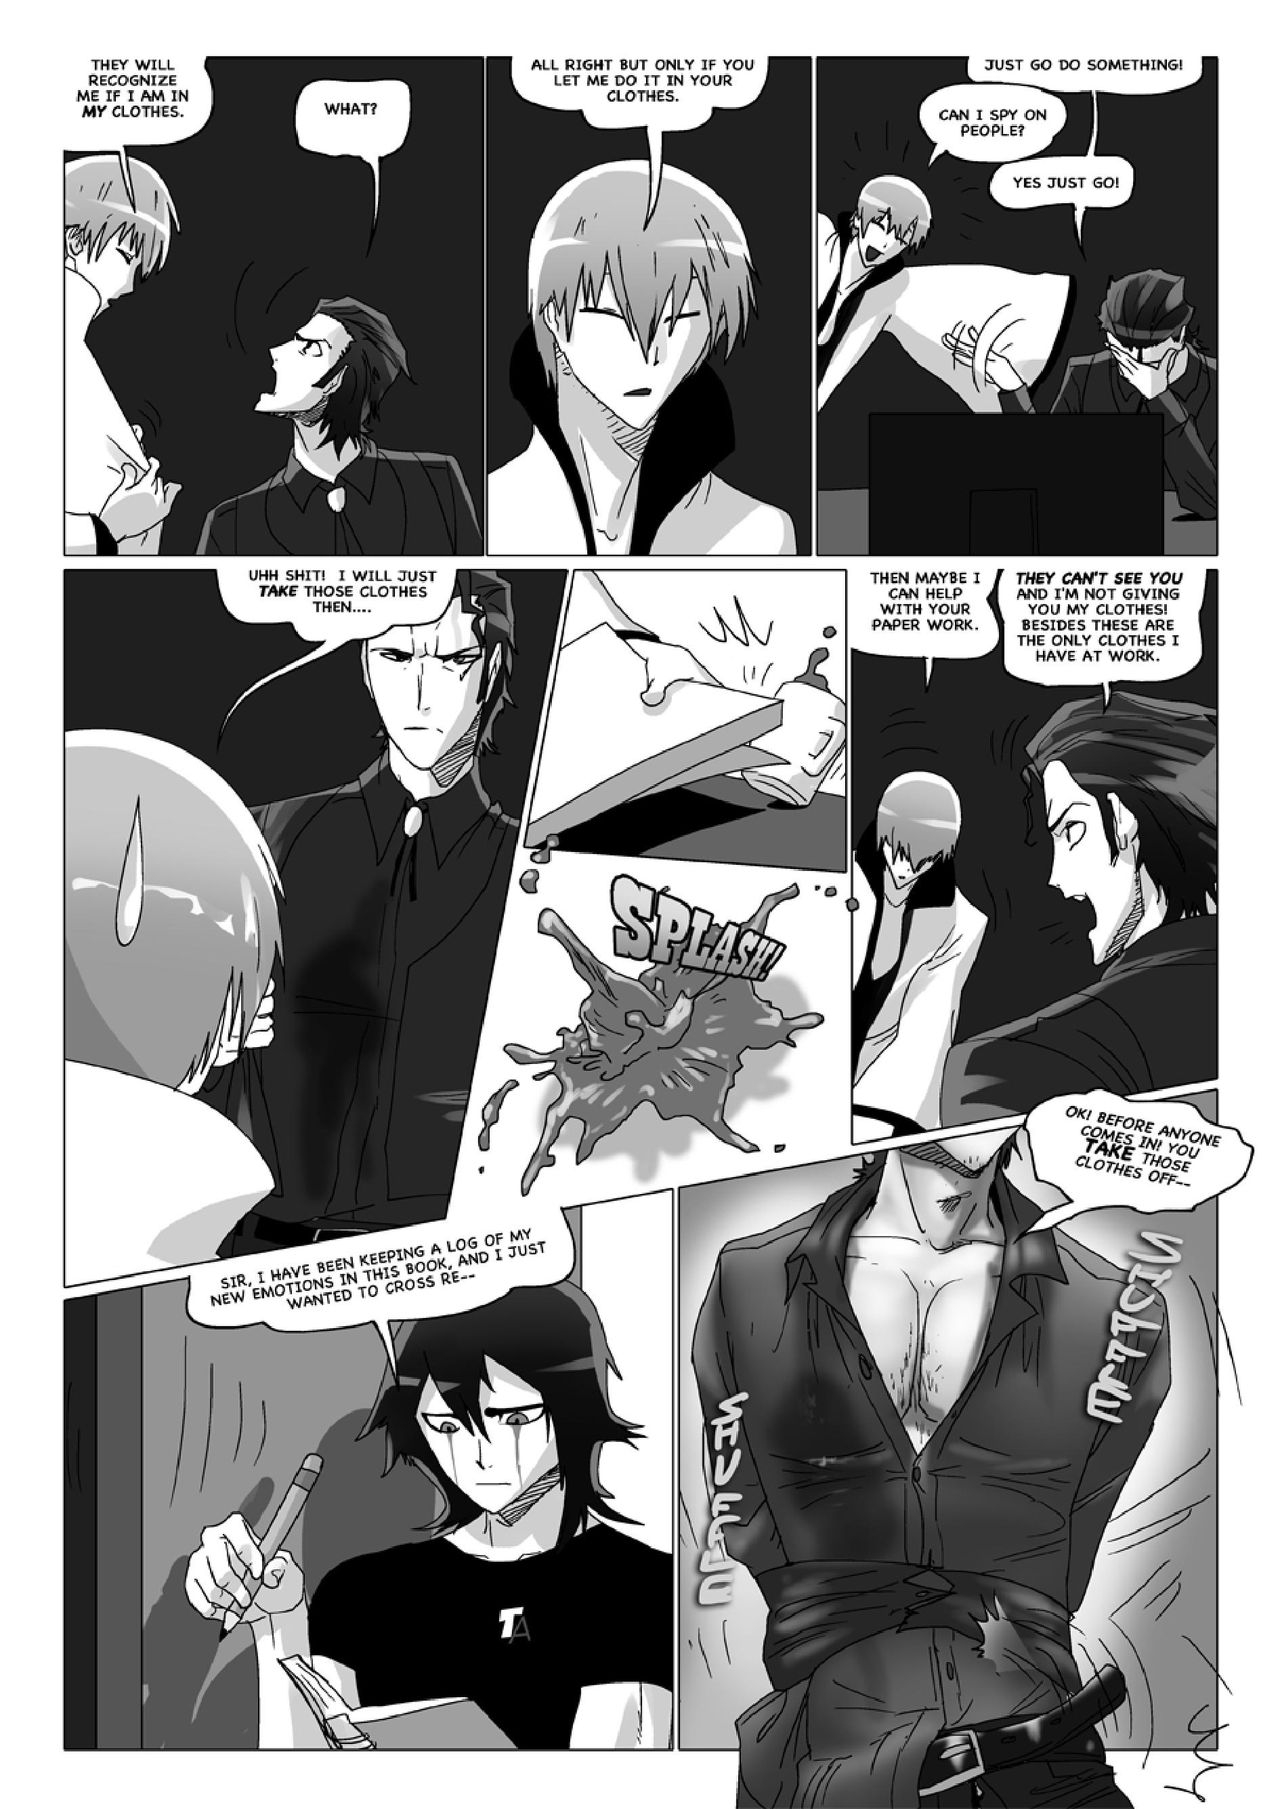 [Gairon] Happy to Serve You - Chapter 9 (Bleach) 3